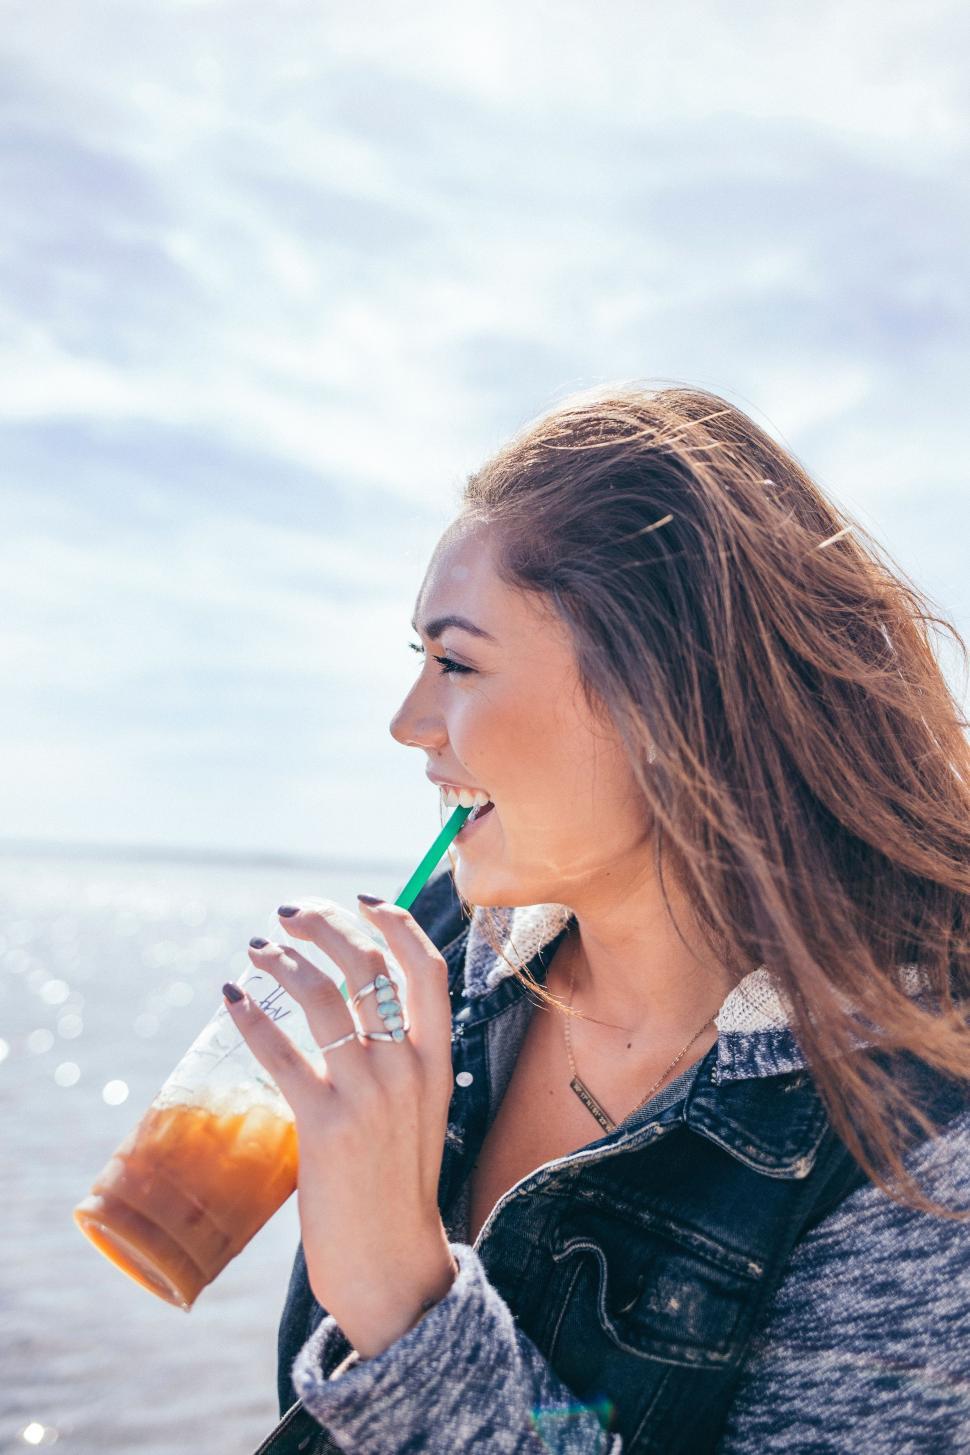 Free Image of Woman Drinking Beverage by Water 